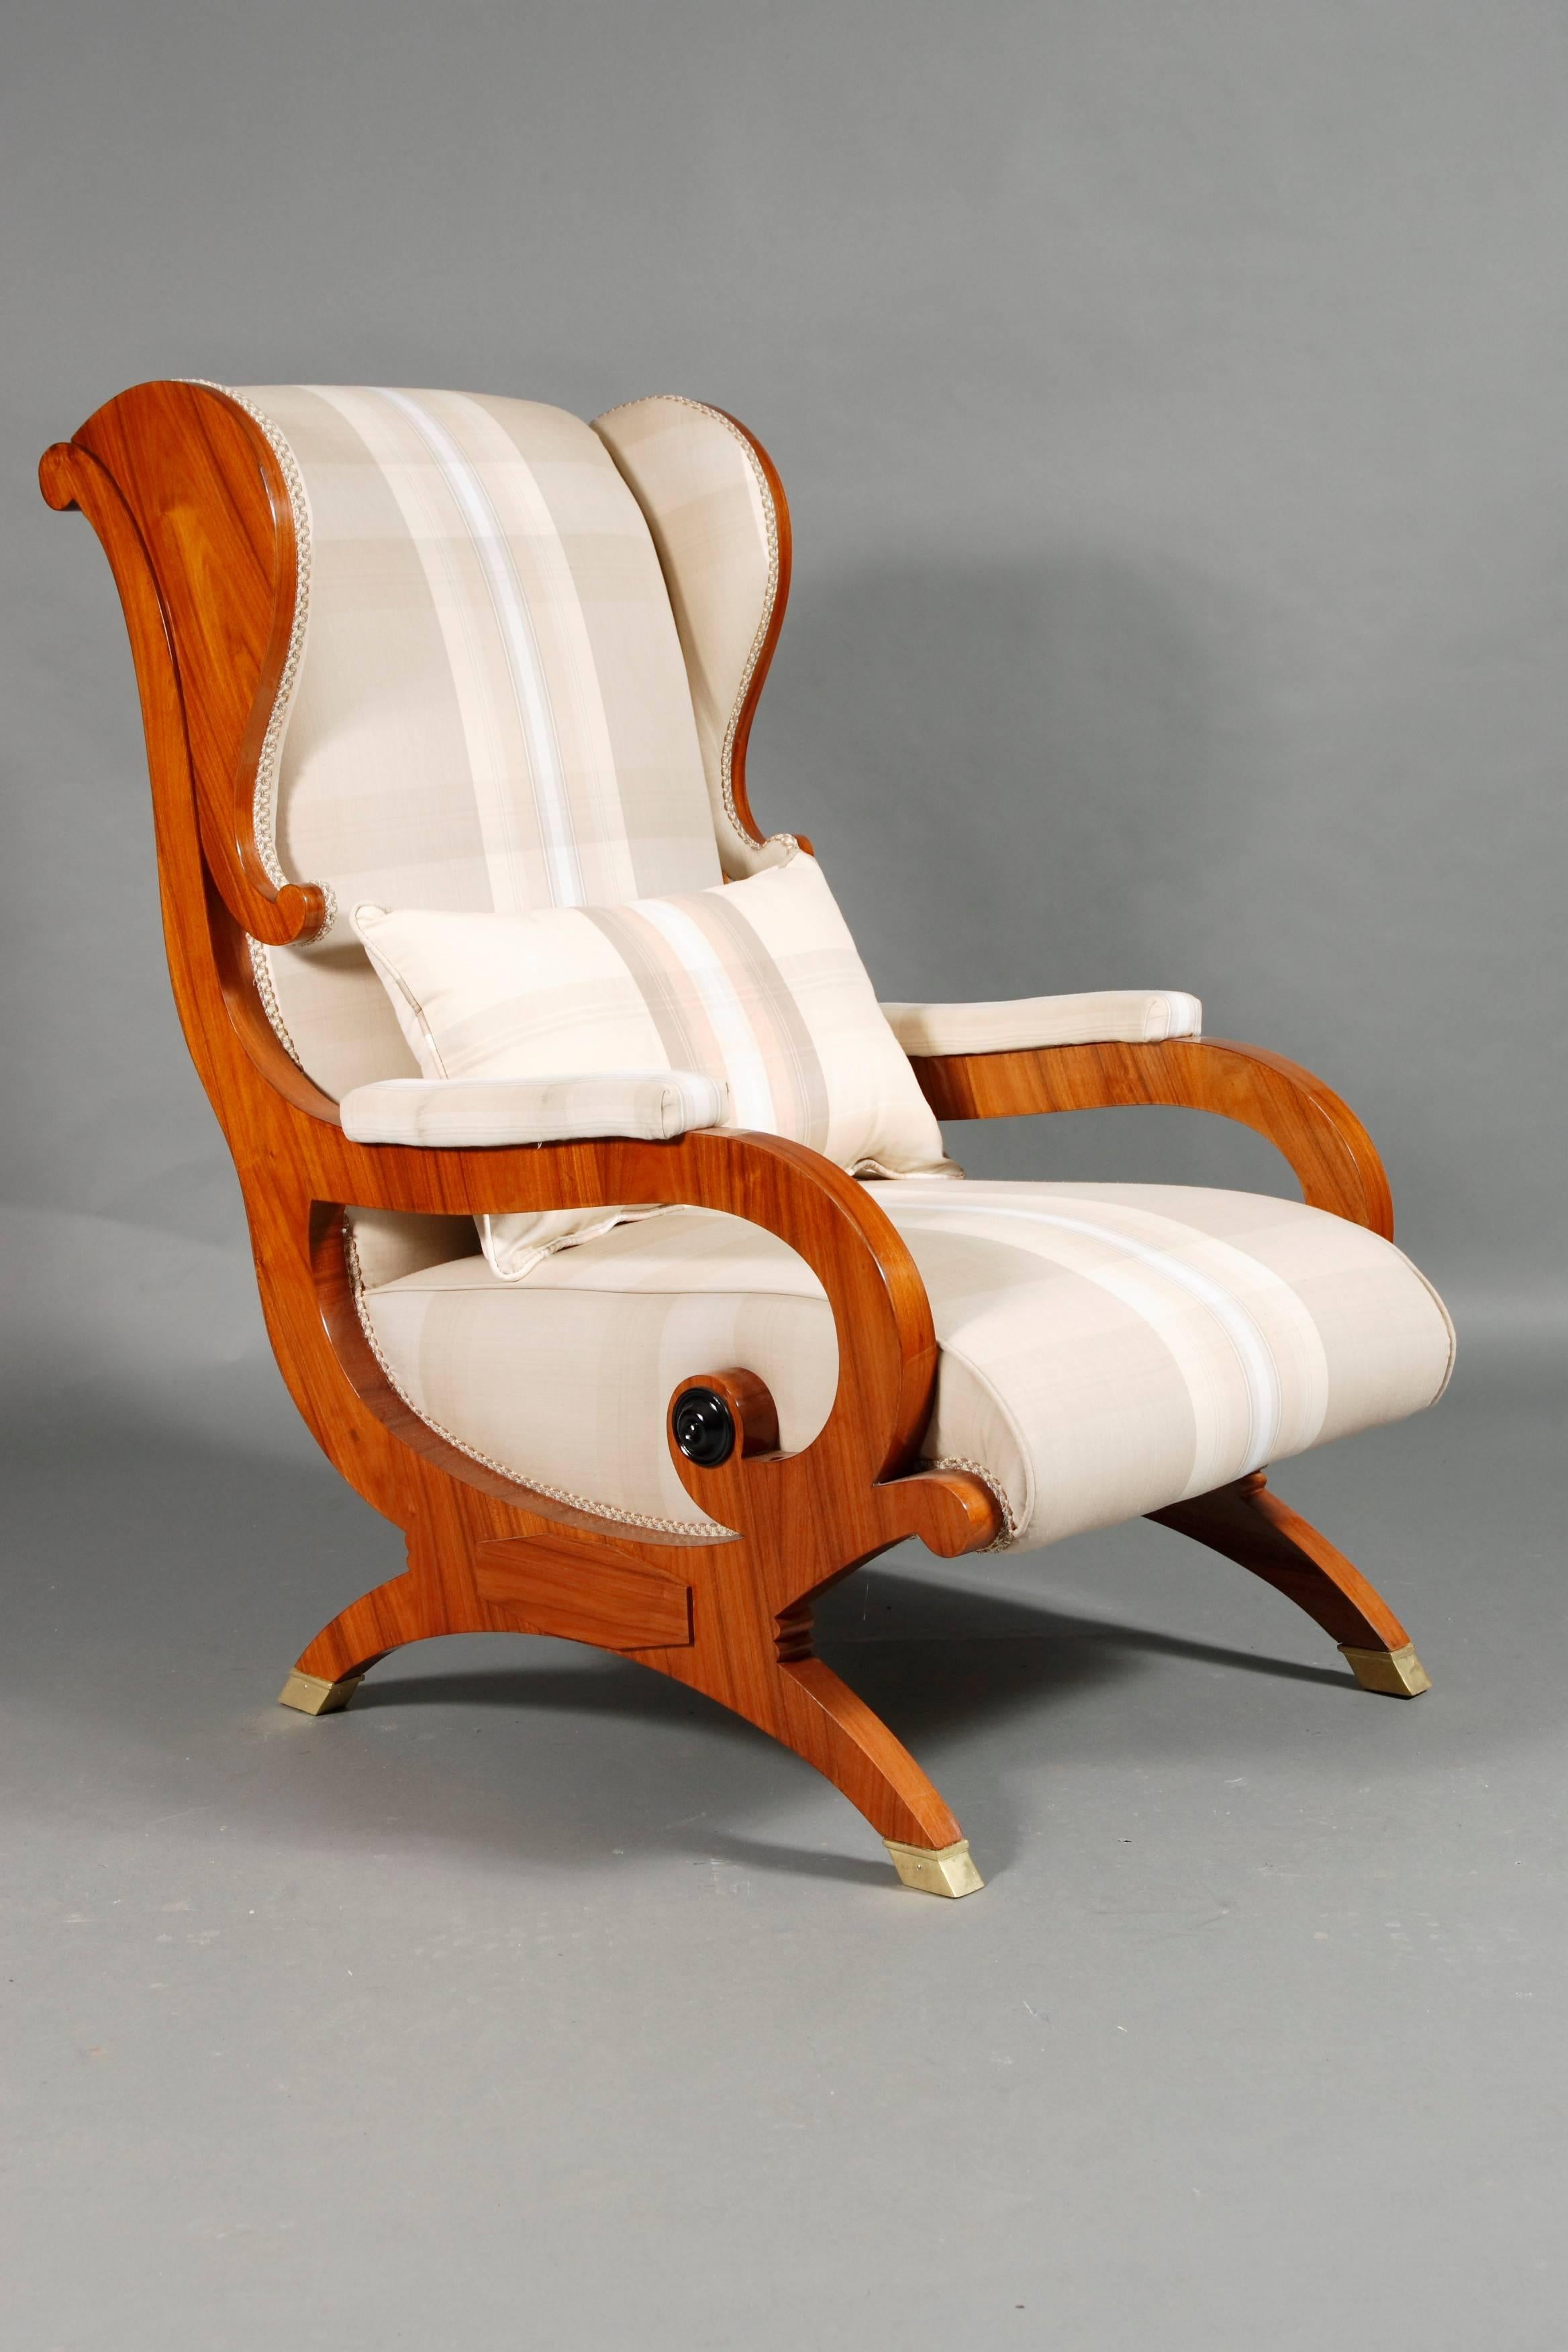 Bright rosewood on solid beechwood. Over side semicircular bodice struts on exposed feet ending in sabots. Highly rolled volute arms, slightly oblique and curving backrest with large rounded ears. This model is very rare even in good furniture